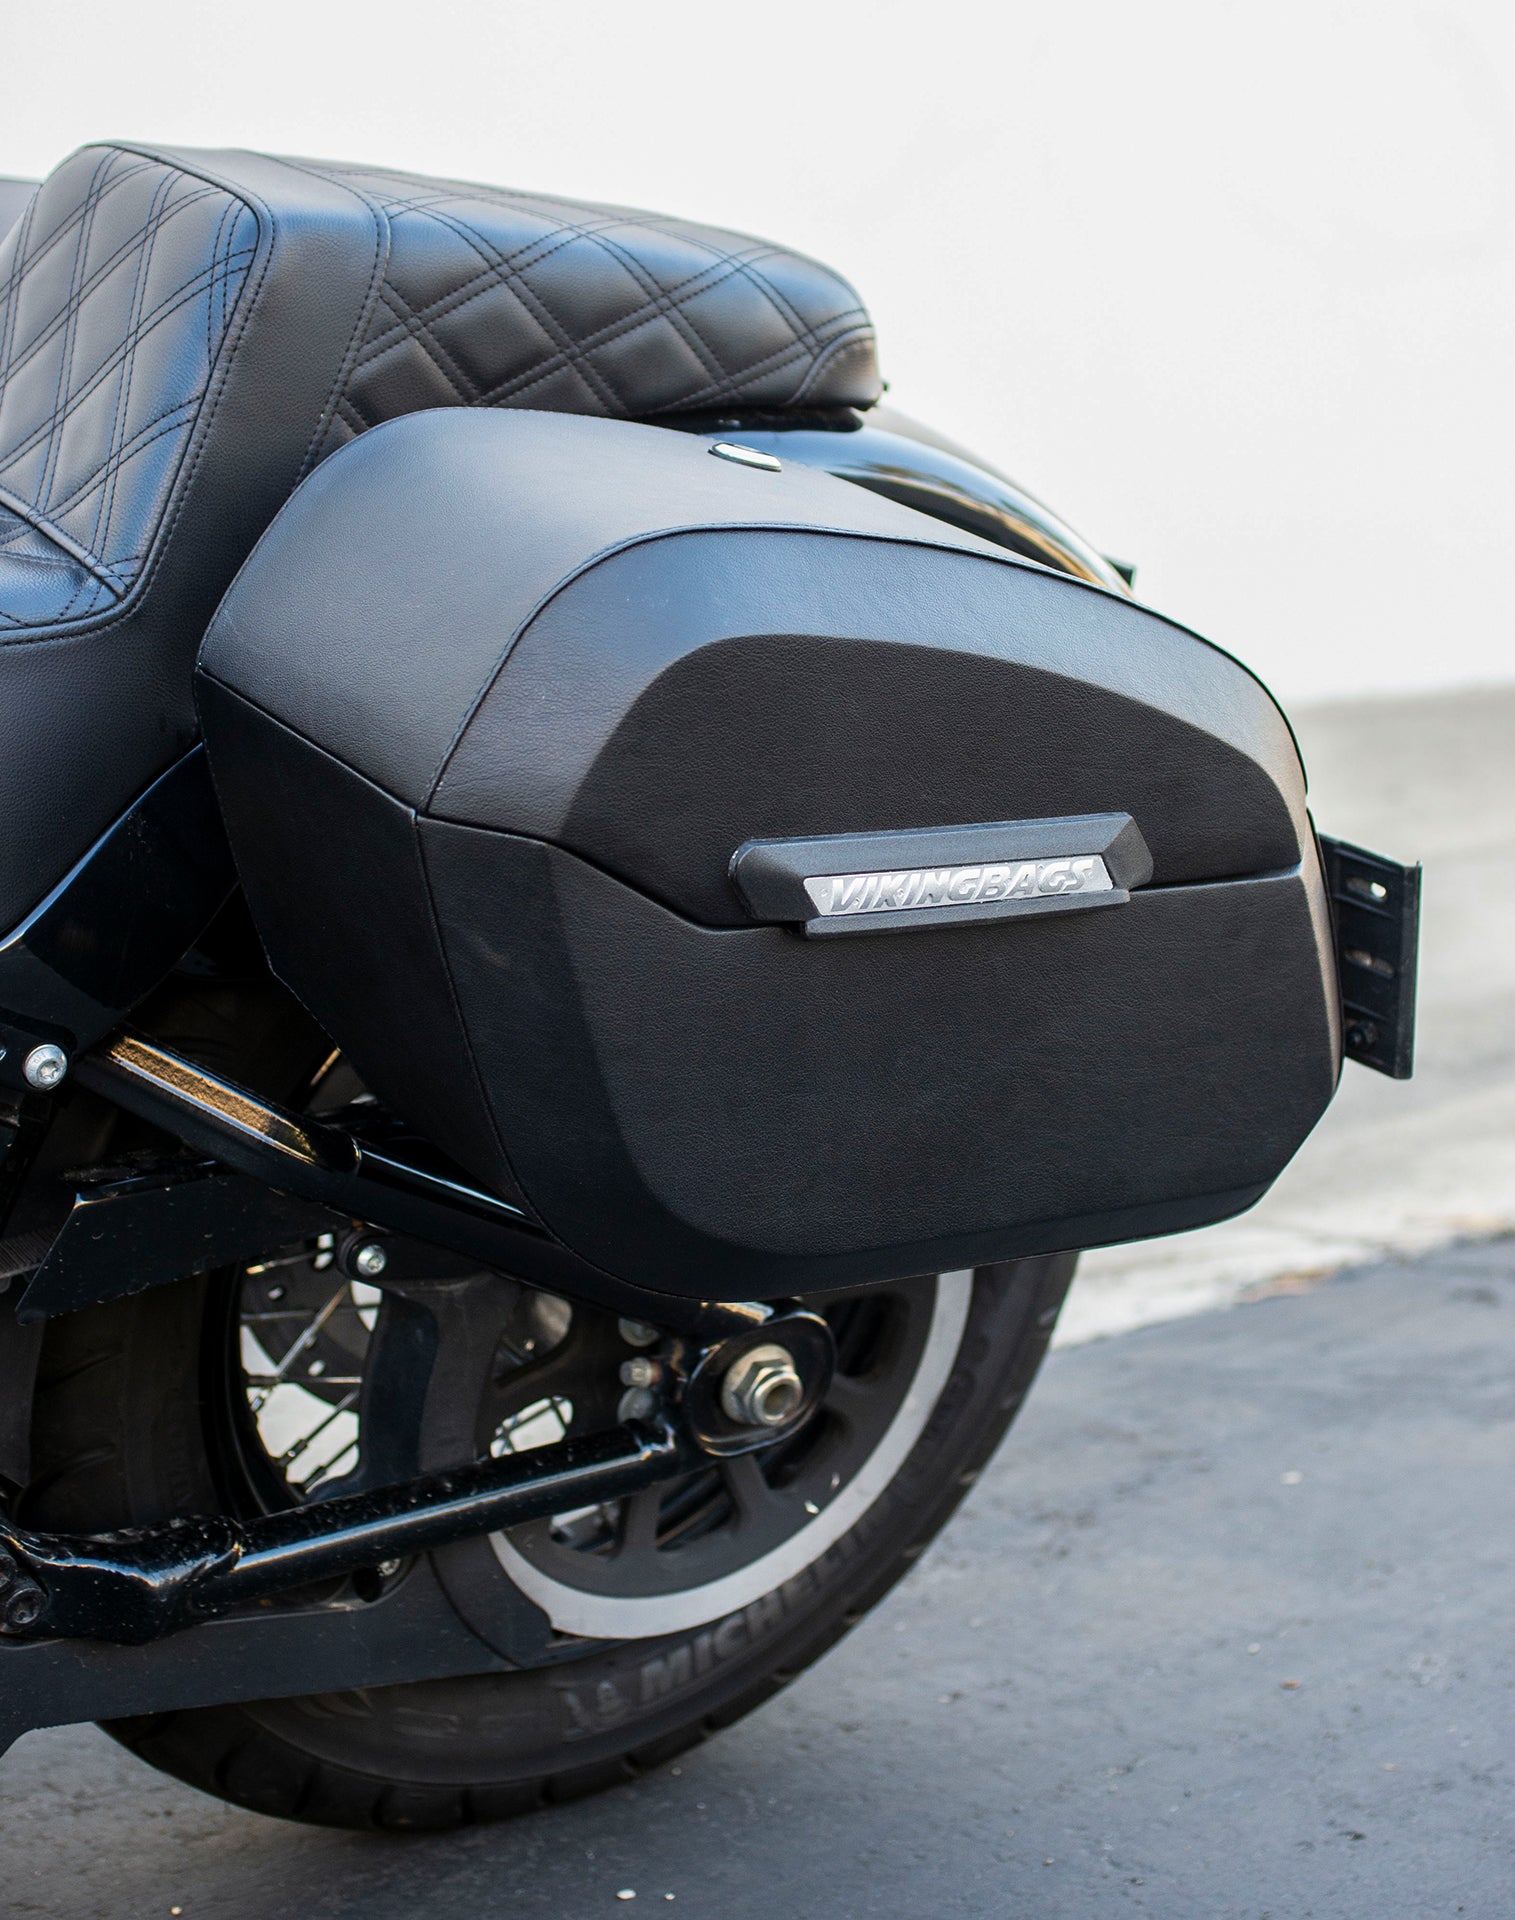 32L - Darkin Large Quick Mount Leather Wrapped Hard Saddlebags for Harley Softail Street Bob FXBB